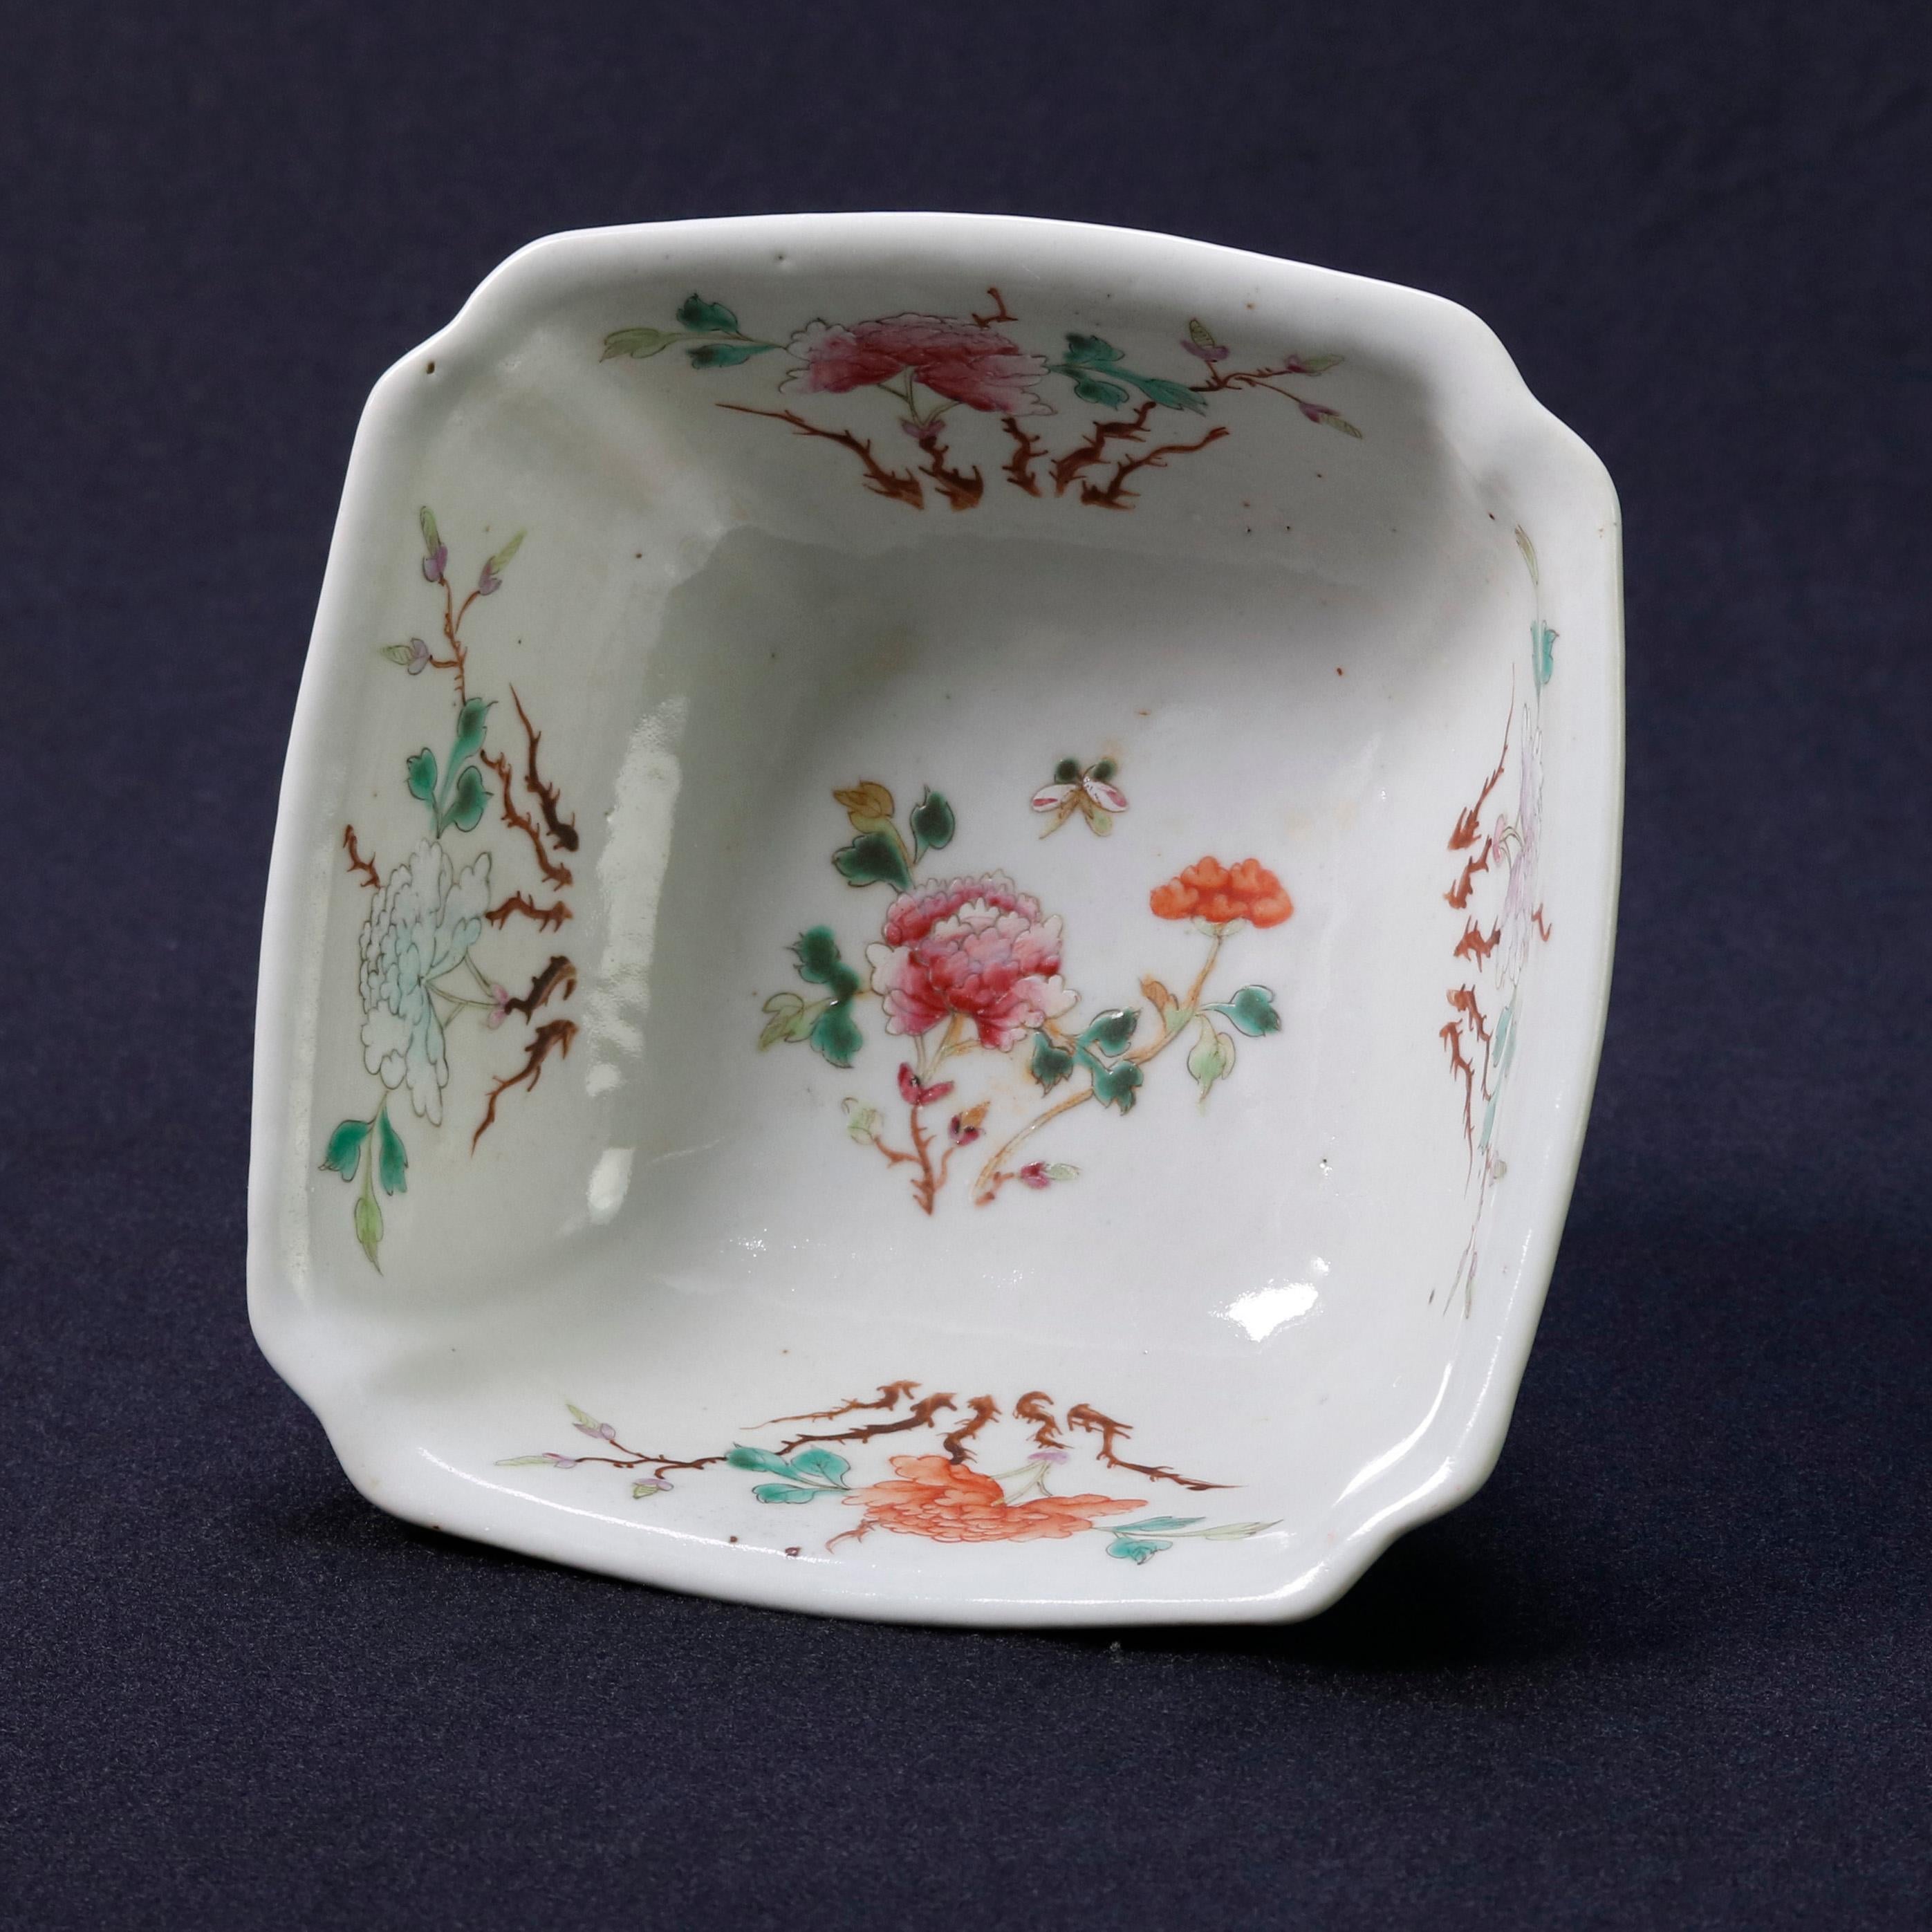 An antique Chinese celadon hand decorated porcelain bowl offers clipped corner square form with all-over floral exterior decoration and hand painted interior floral reserves, seated on squat and flared foot, signed on base as photographed, 19th